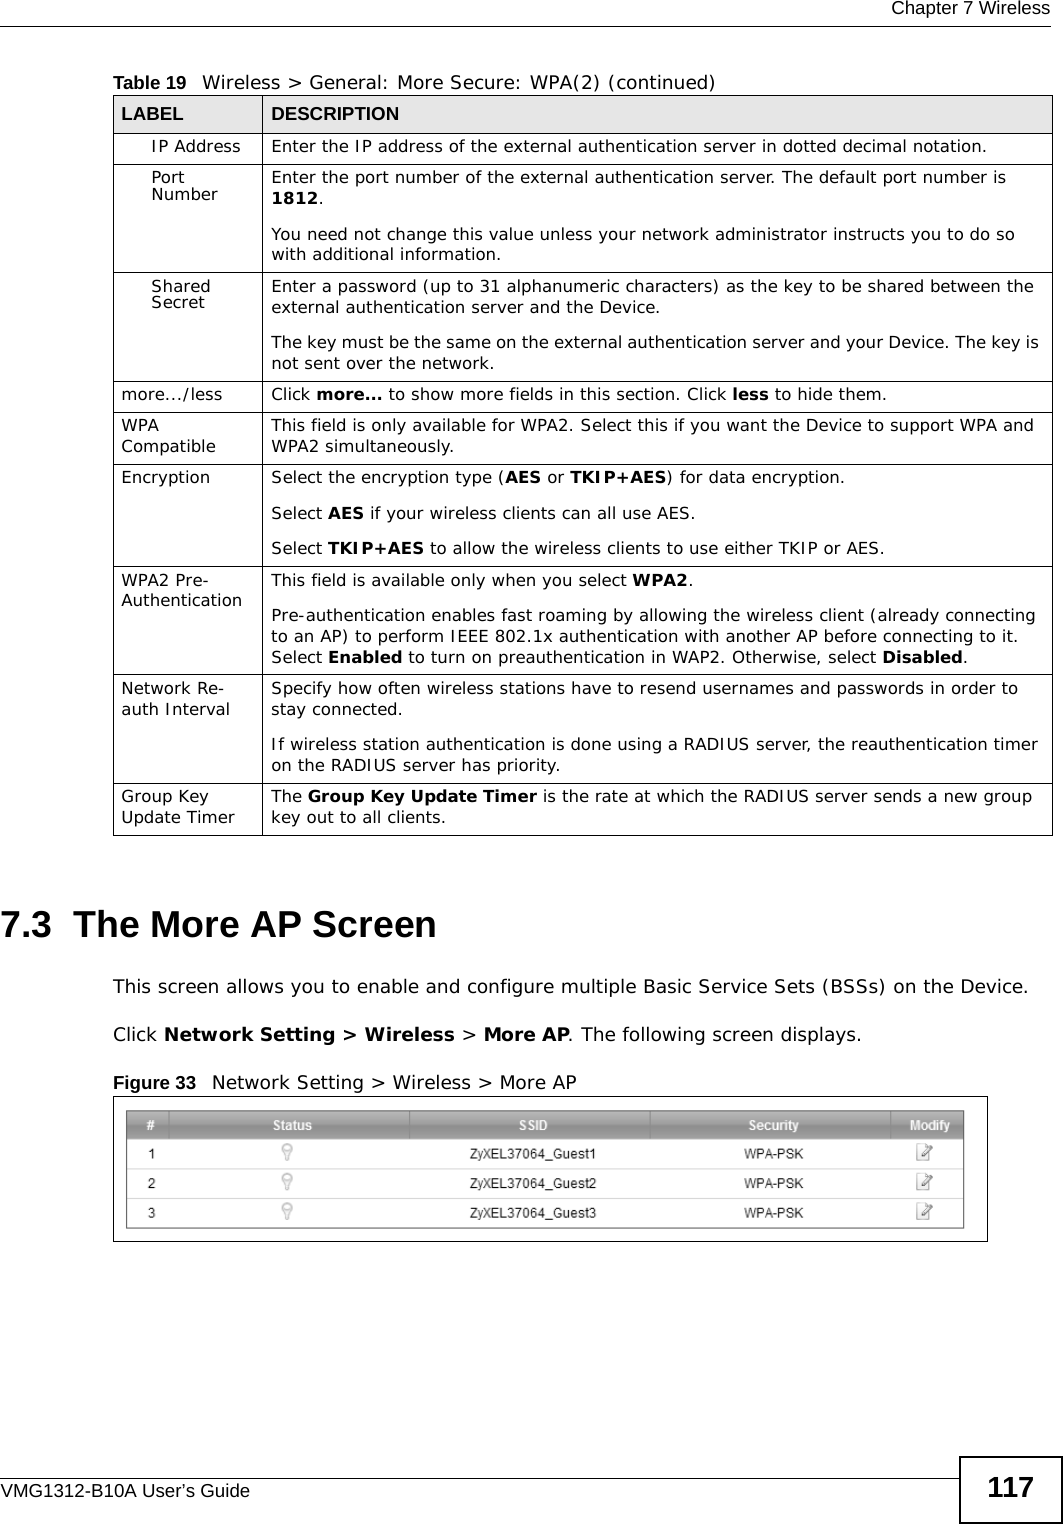  Chapter 7 WirelessVMG1312-B10A User’s Guide 1177.3  The More AP ScreenThis screen allows you to enable and configure multiple Basic Service Sets (BSSs) on the Device.Click Network Setting &gt; Wireless &gt; More AP. The following screen displays.Figure 33   Network Setting &gt; Wireless &gt; More APIP Address Enter the IP address of the external authentication server in dotted decimal notation.Port Number Enter the port number of the external authentication server. The default port number is 1812. You need not change this value unless your network administrator instructs you to do so with additional information. Shared Secret Enter a password (up to 31 alphanumeric characters) as the key to be shared between the external authentication server and the Device.The key must be the same on the external authentication server and your Device. The key is not sent over the network. more.../less Click more... to show more fields in this section. Click less to hide them.WPA Compatible This field is only available for WPA2. Select this if you want the Device to support WPA and WPA2 simultaneously.Encryption Select the encryption type (AES or TKIP+AES) for data encryption.Select AES if your wireless clients can all use AES.Select TKIP+AES to allow the wireless clients to use either TKIP or AES.WPA2 Pre-Authentication This field is available only when you select WPA2.Pre-authentication enables fast roaming by allowing the wireless client (already connecting to an AP) to perform IEEE 802.1x authentication with another AP before connecting to it. Select Enabled to turn on preauthentication in WAP2. Otherwise, select Disabled.Network Re-auth Interval Specify how often wireless stations have to resend usernames and passwords in order to stay connected.If wireless station authentication is done using a RADIUS server, the reauthentication timer on the RADIUS server has priority.Group Key Update Timer The Group Key Update Timer is the rate at which the RADIUS server sends a new group key out to all clients. Table 19   Wireless &gt; General: More Secure: WPA(2) (continued)LABEL DESCRIPTION